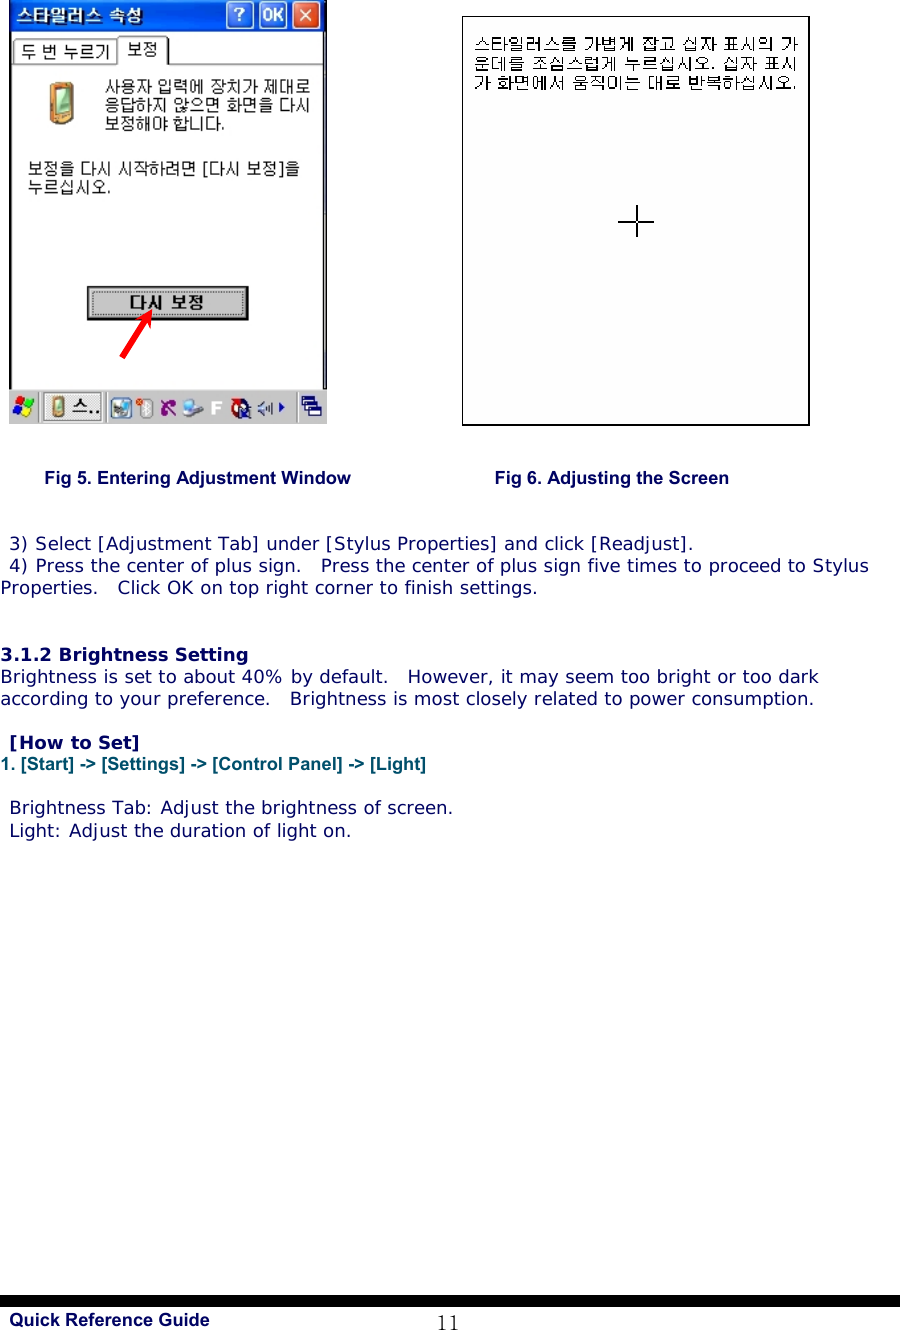   Quick Reference Guide 11   Fig 5. Entering Adjustment Window                Fig 6. Adjusting the Screen   3) Select [Adjustment Tab] under [Stylus Properties] and click [Readjust]. 4) Press the center of plus sign.  Press the center of plus sign five times to proceed to Stylus Properties.  Click OK on top right corner to finish settings.    3.1.2 Brightness Setting Brightness is set to about 40% by default.  However, it may seem too bright or too dark according to your preference.  Brightness is most closely related to power consumption.  [How to Set] 1. [Start] -&gt; [Settings] -&gt; [Control Panel] -&gt; [Light]  Brightness Tab: Adjust the brightness of screen. Light: Adjust the duration of light on.  